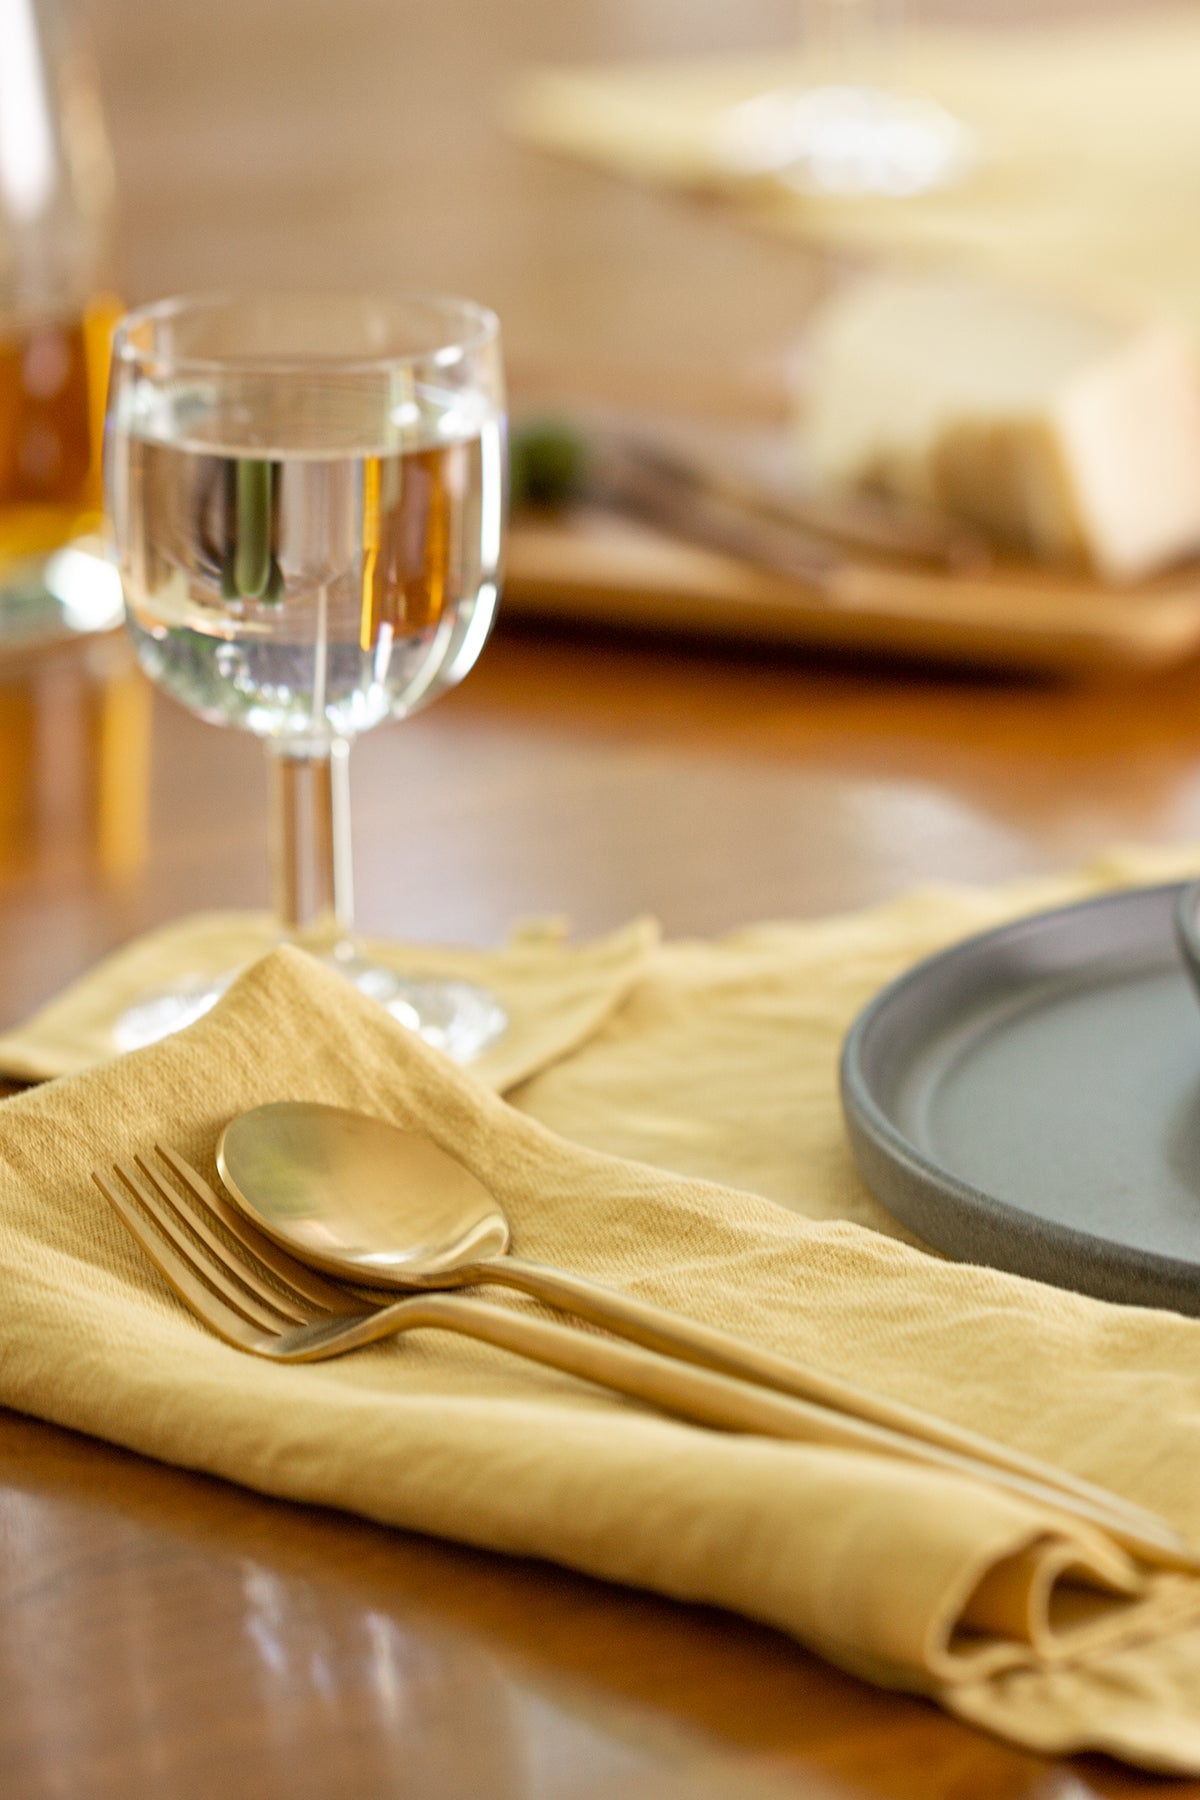 A neatly set dining table with an elegant yellow Jenny Graham Home linen napkin, a spoon, and a glass of water, with blurry plates and a meal in the background.-14899235586241